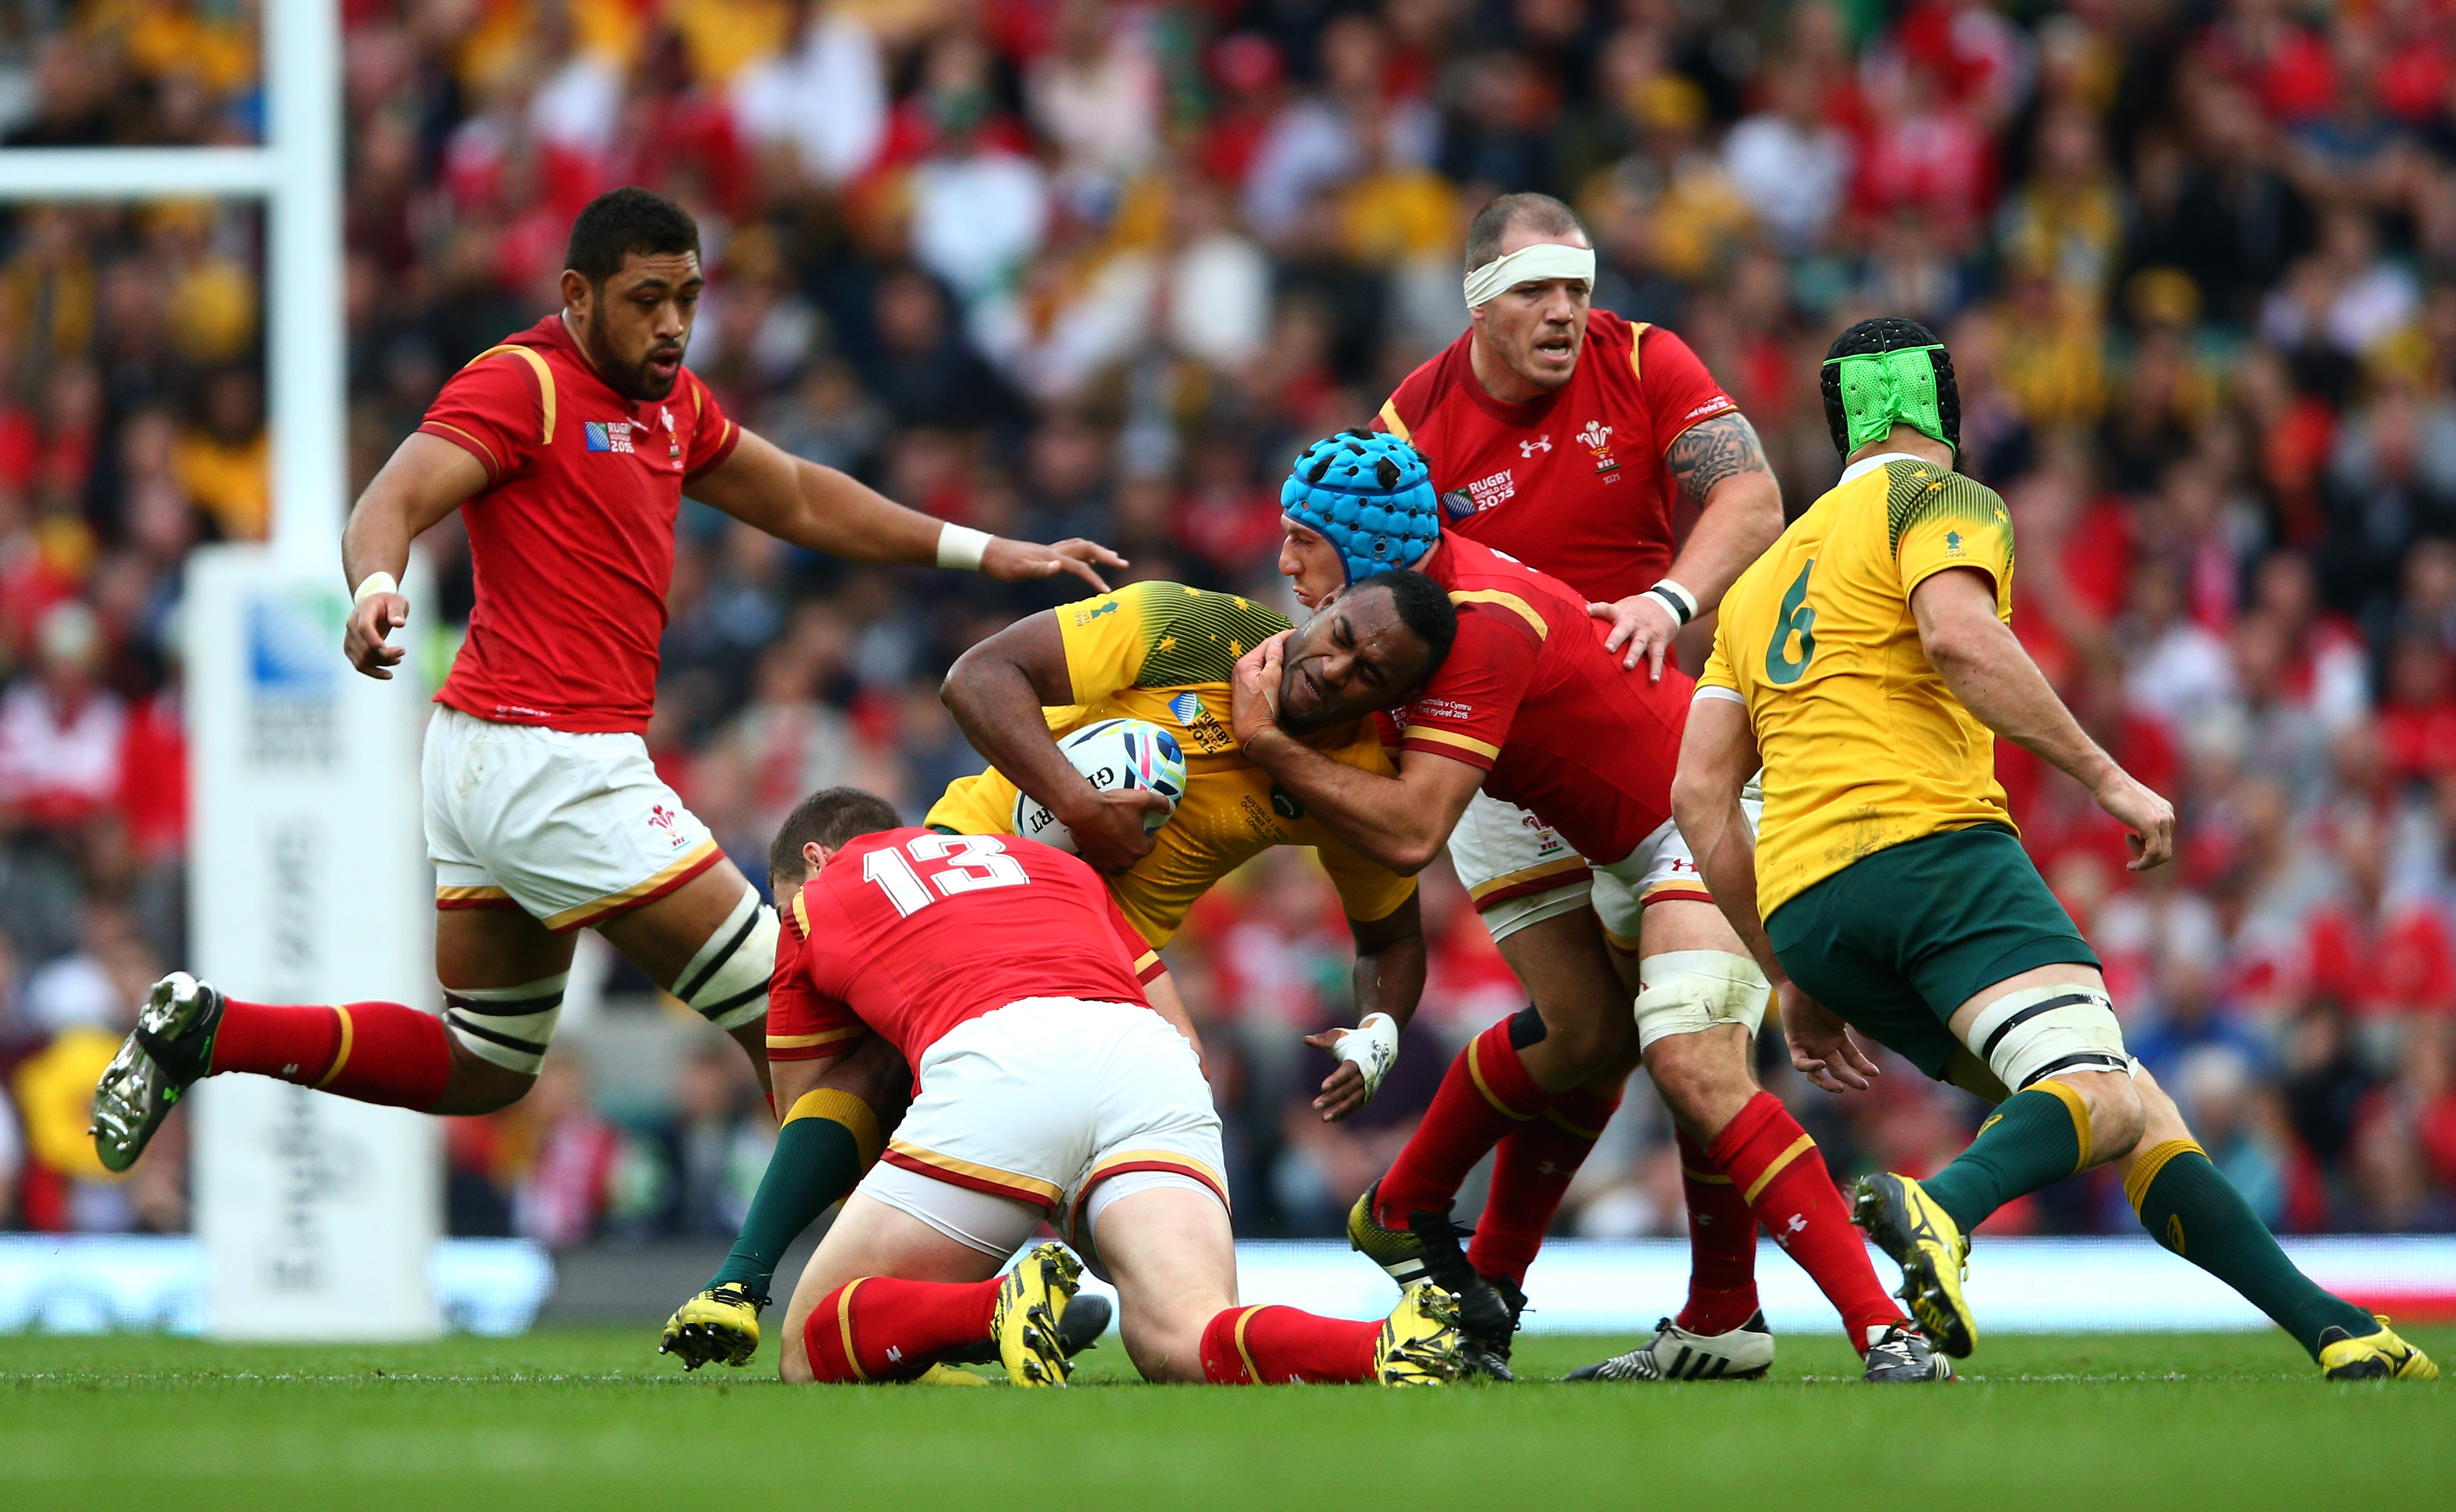 LONDON, ENGLAND - OCTOBER 10:Tevita Kuridrani of Australia is tackled by George North and Justin Tipuric of Wales during the 2015 Rugby World Cup Pool A match between Australia and Wales at T